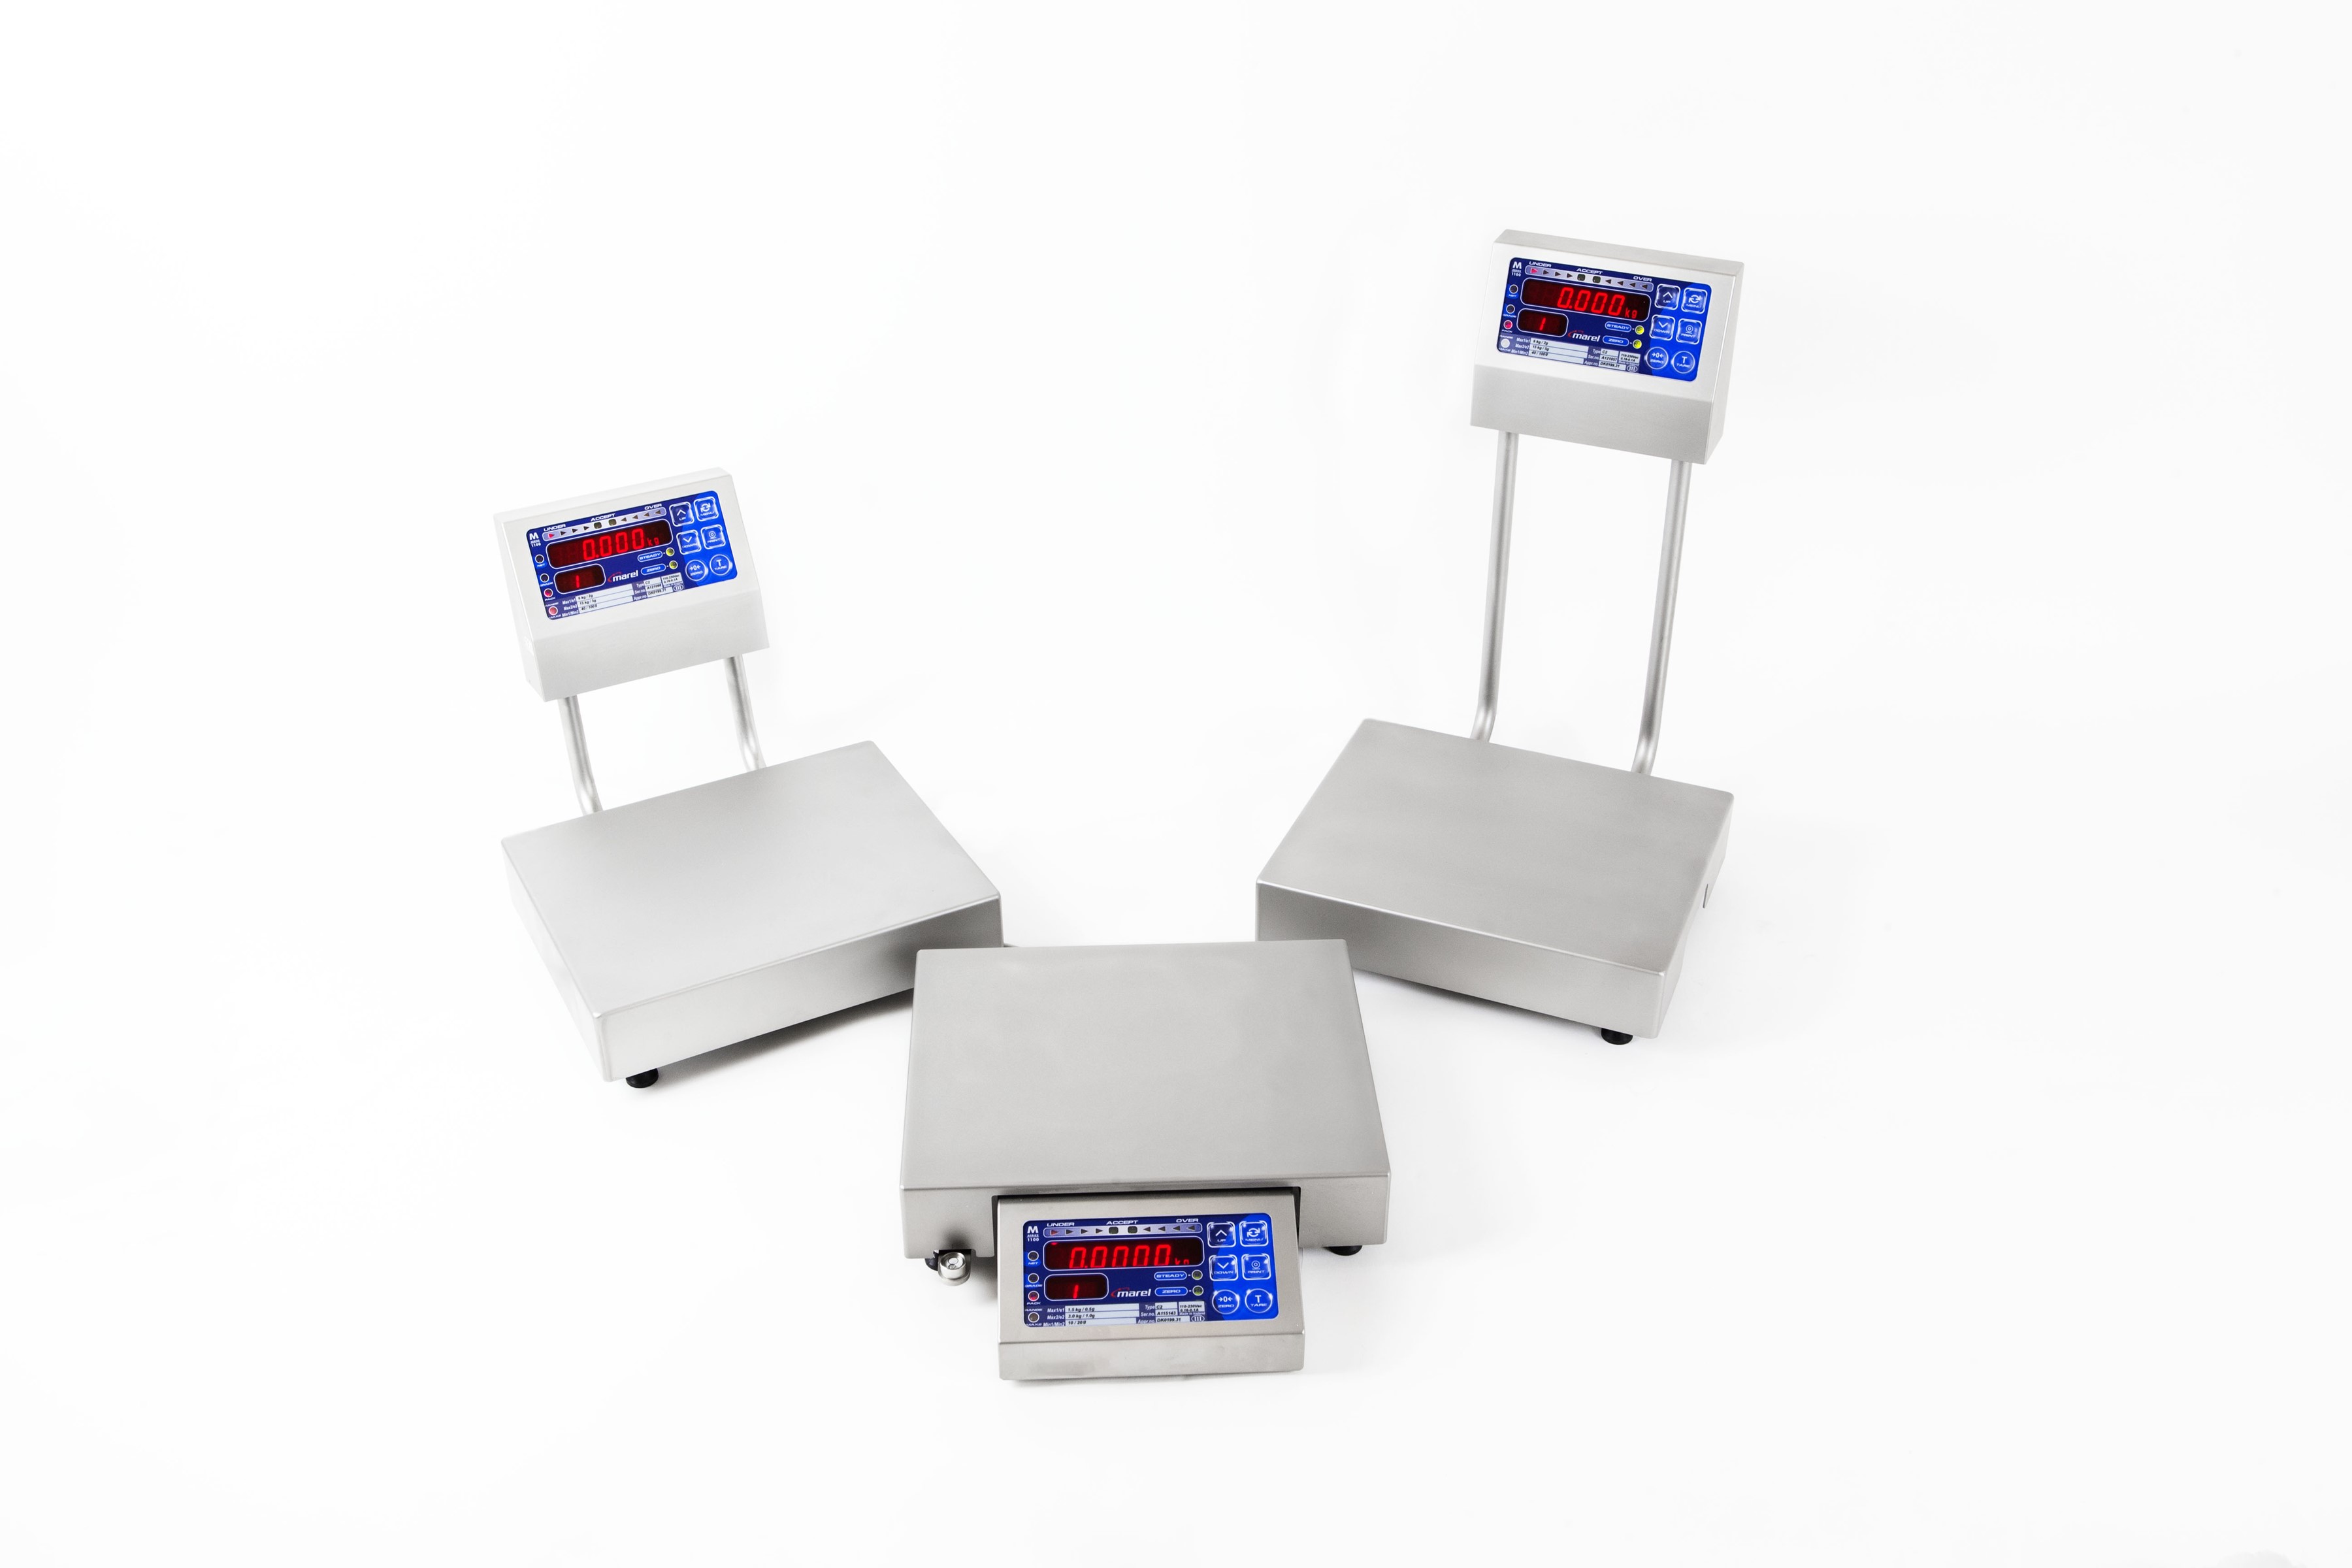 Pork Meat Weighing Scales